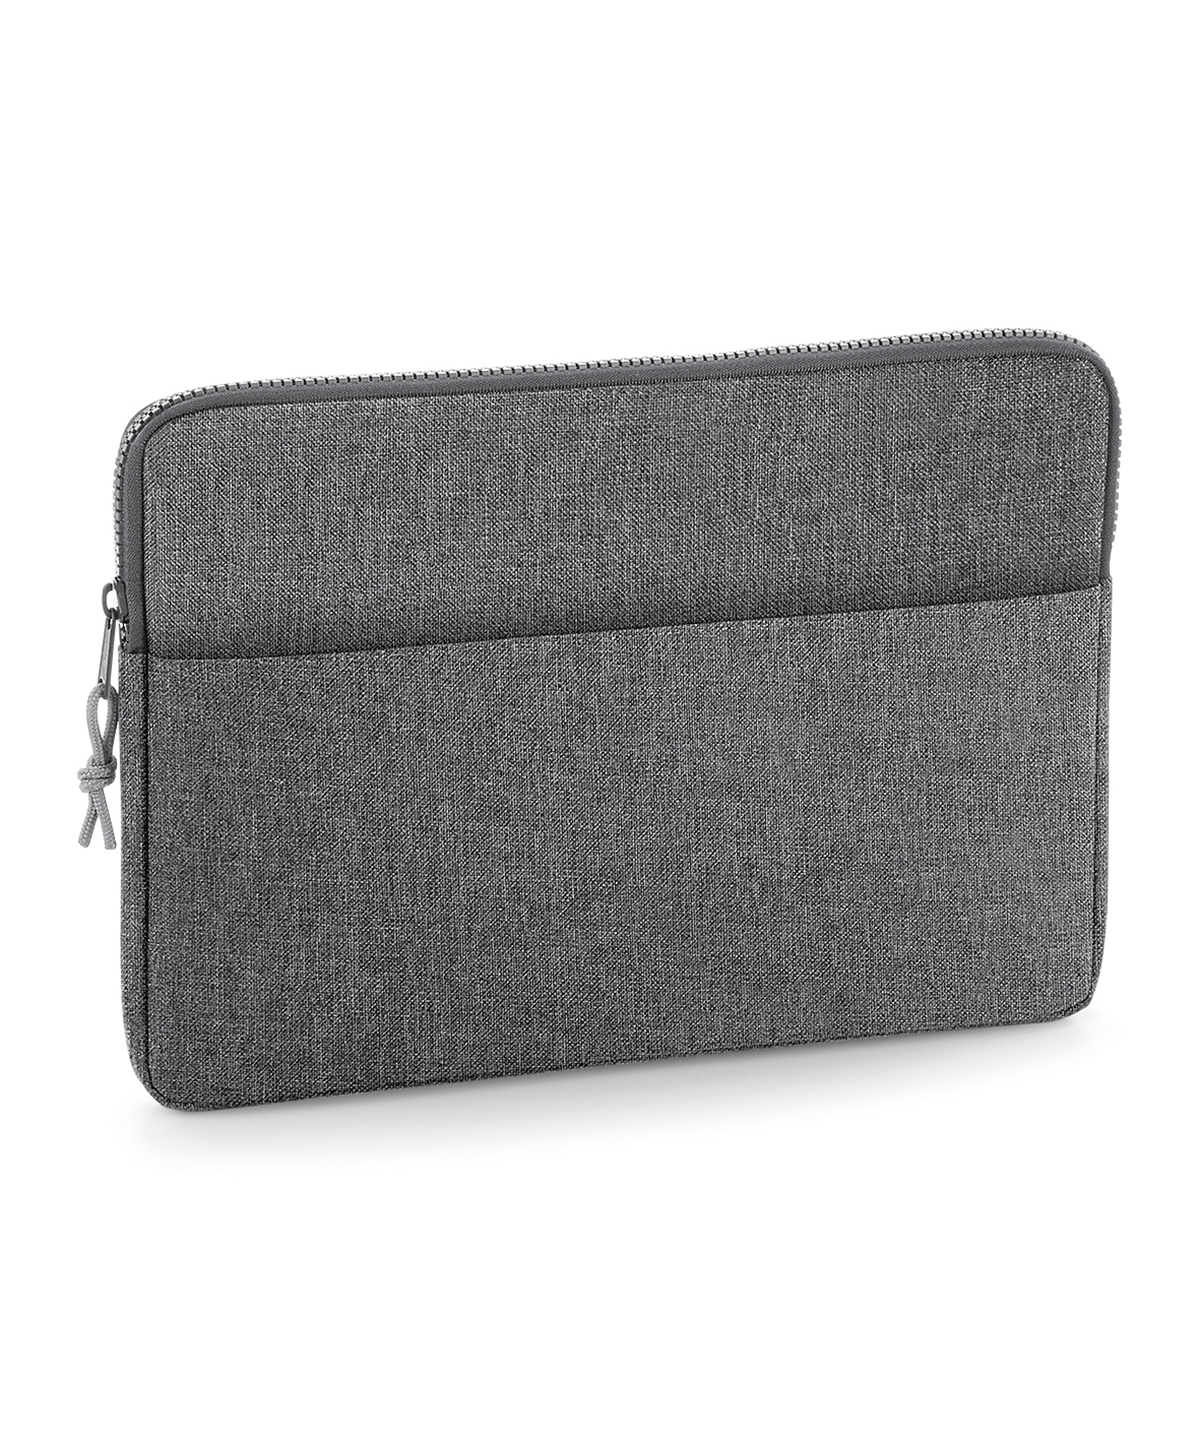 Essential 13" Laptop Case Grey Marl Size One Size